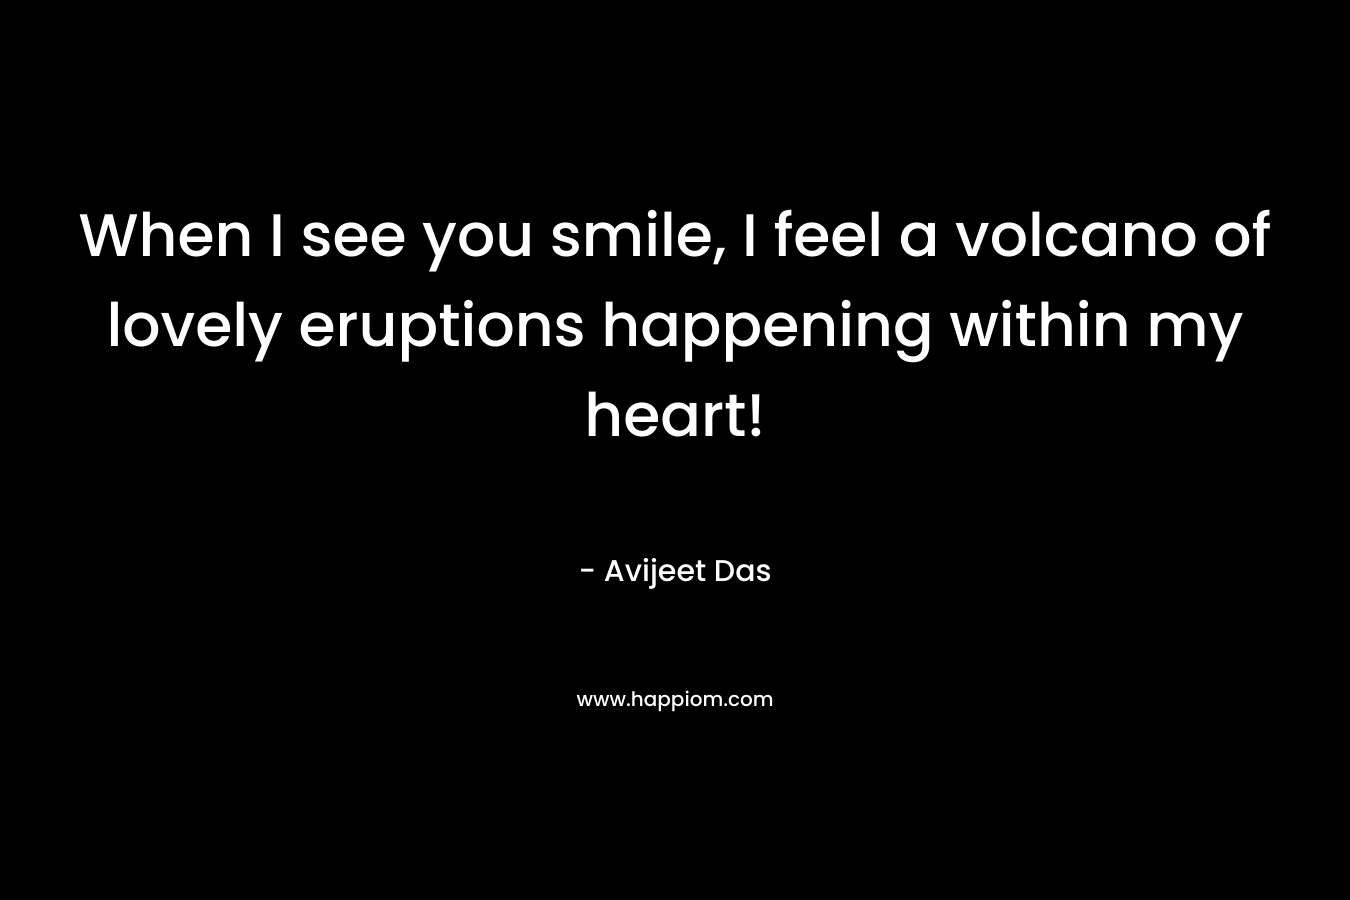 When I see you smile, I feel a volcano of lovely eruptions happening within my heart! – Avijeet Das